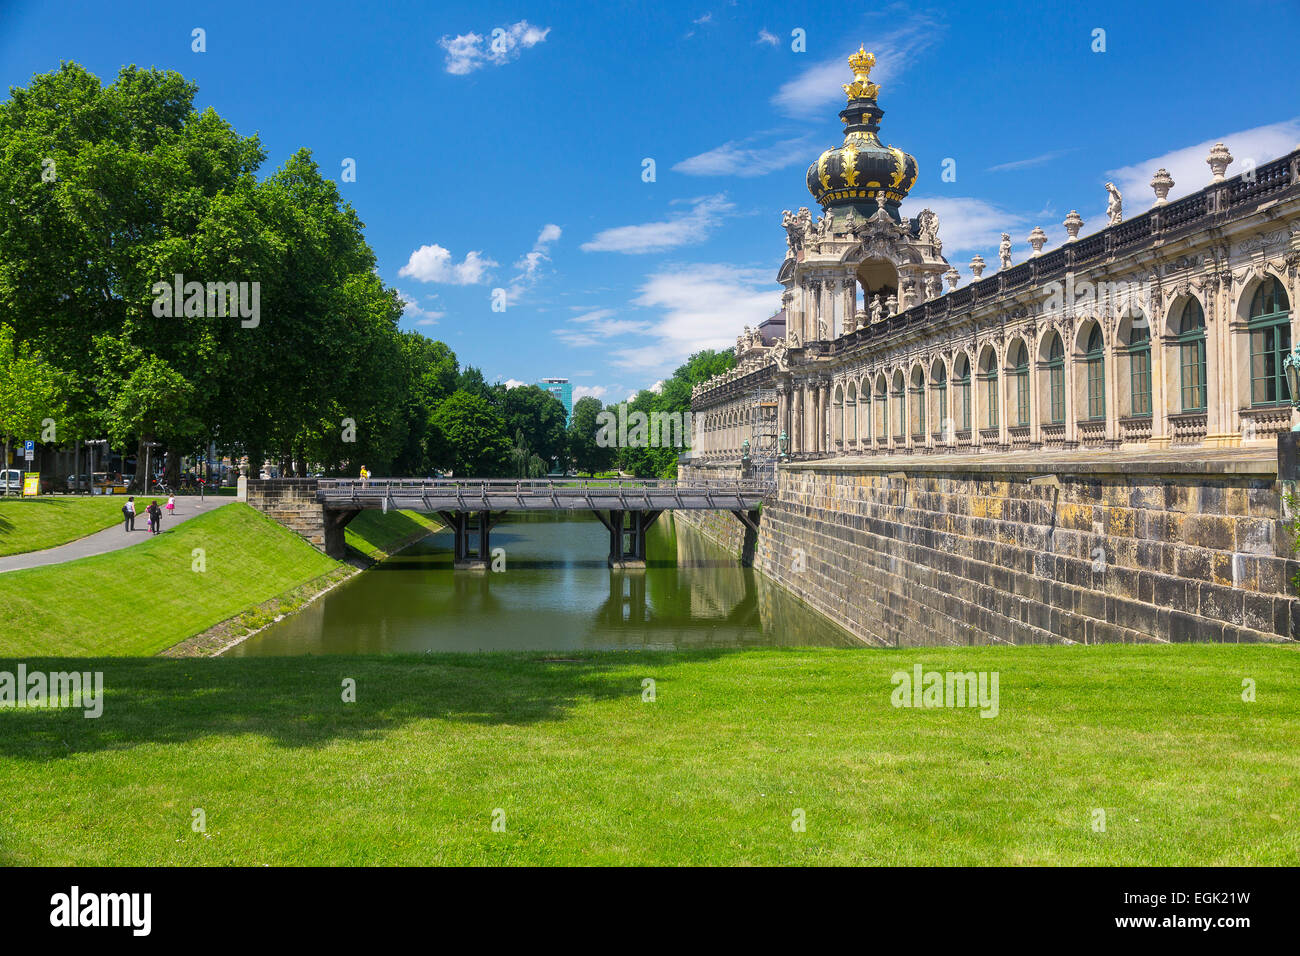 Outside view of the Kronentor, Zwinger, Dresden, Saxony, Germany Stock Photo